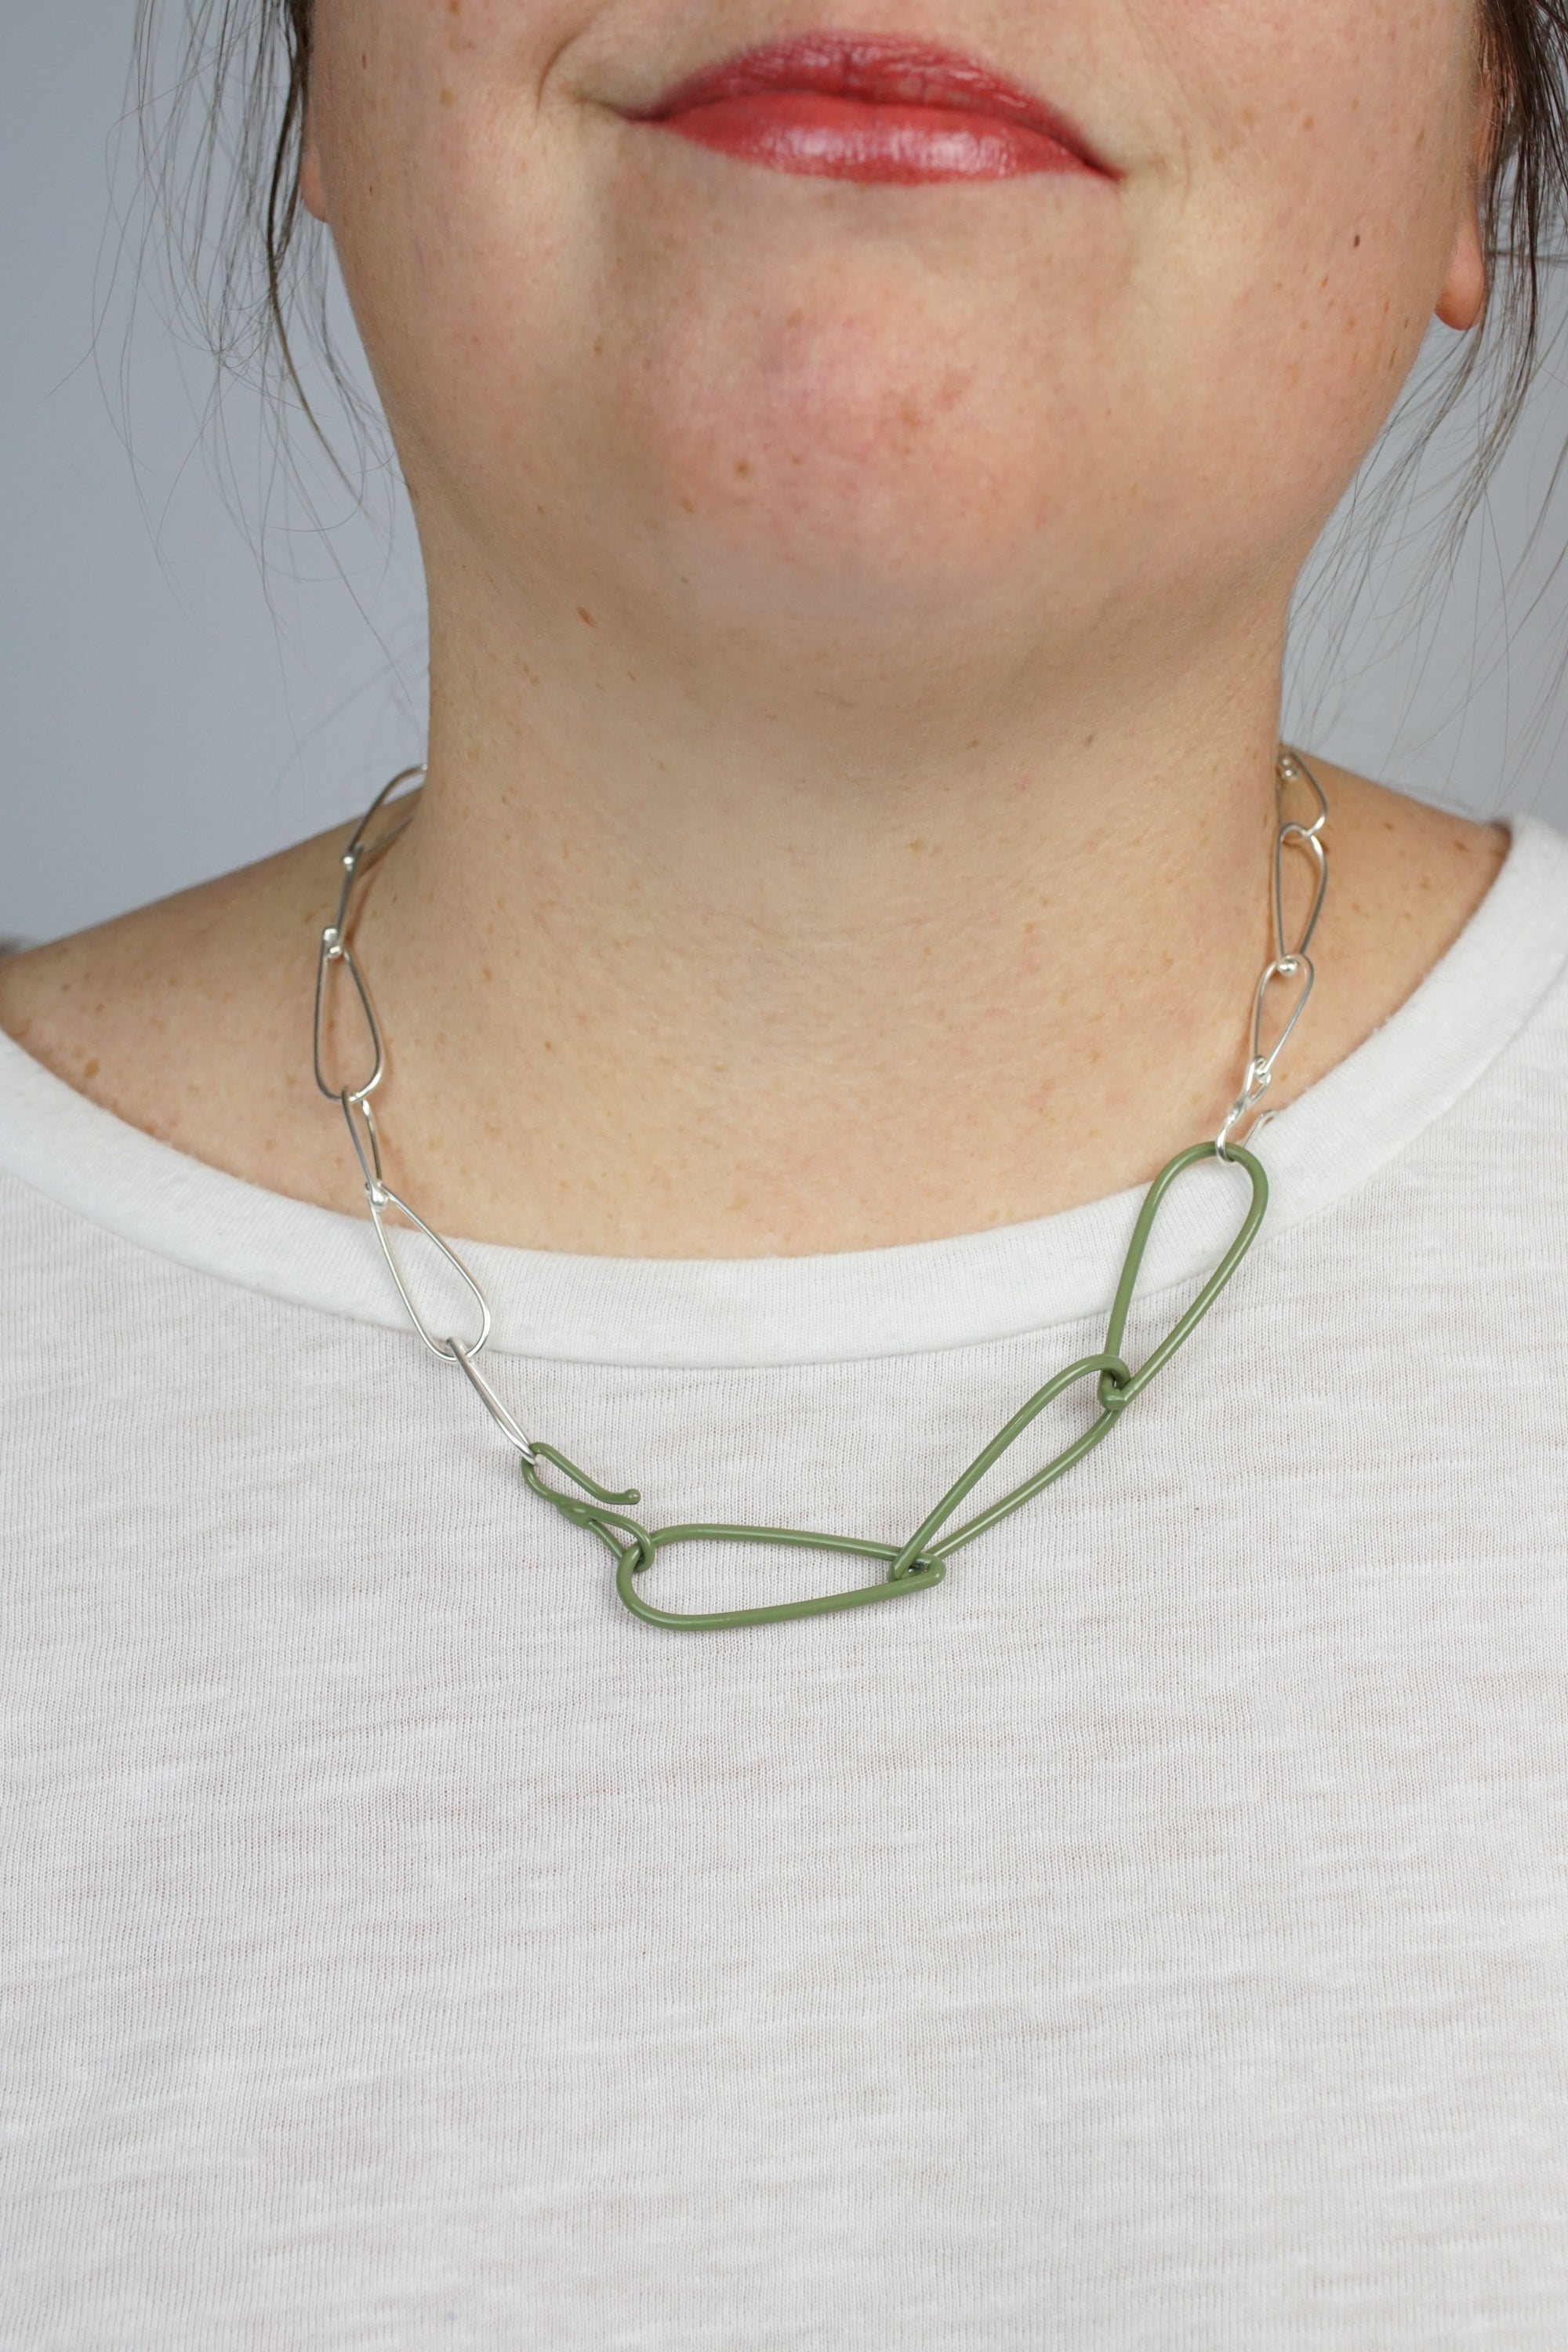 Modular Necklace in Silver and Olive Green